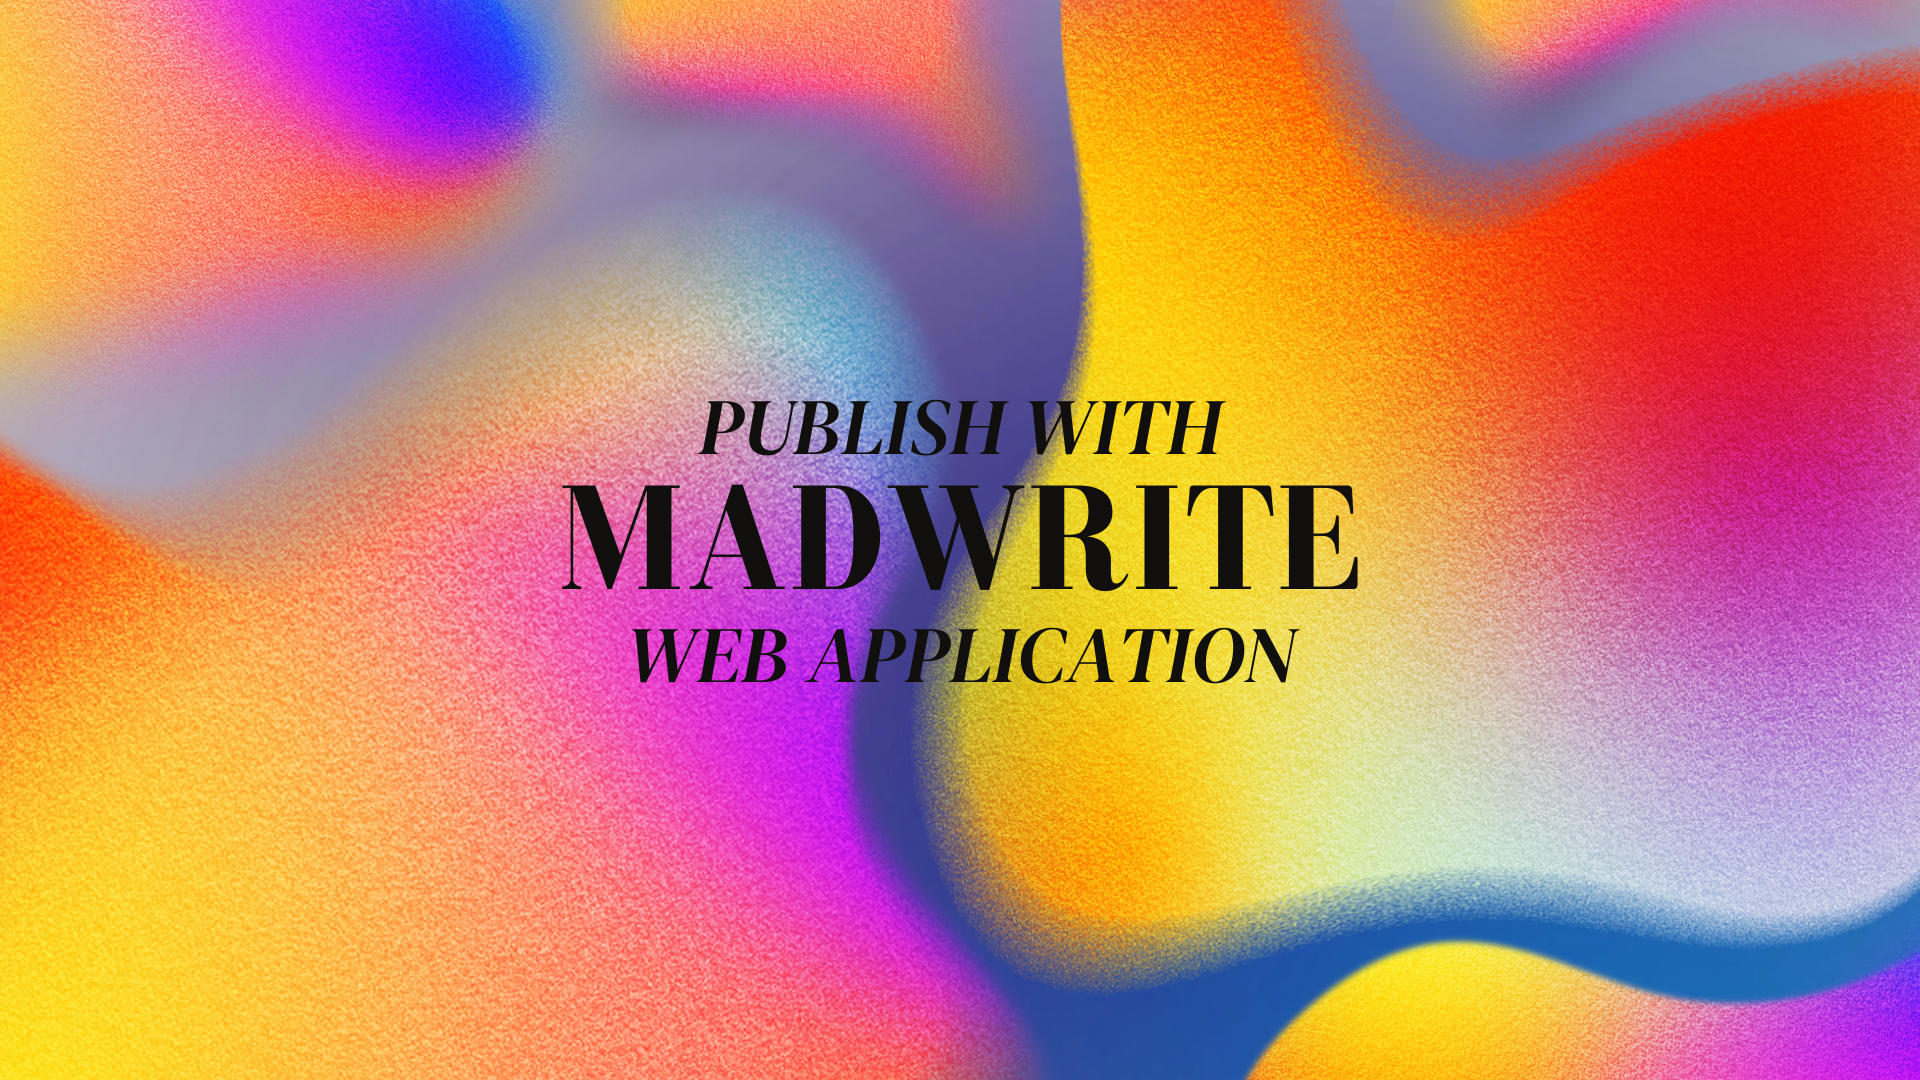 MADWRITE PRODUCT